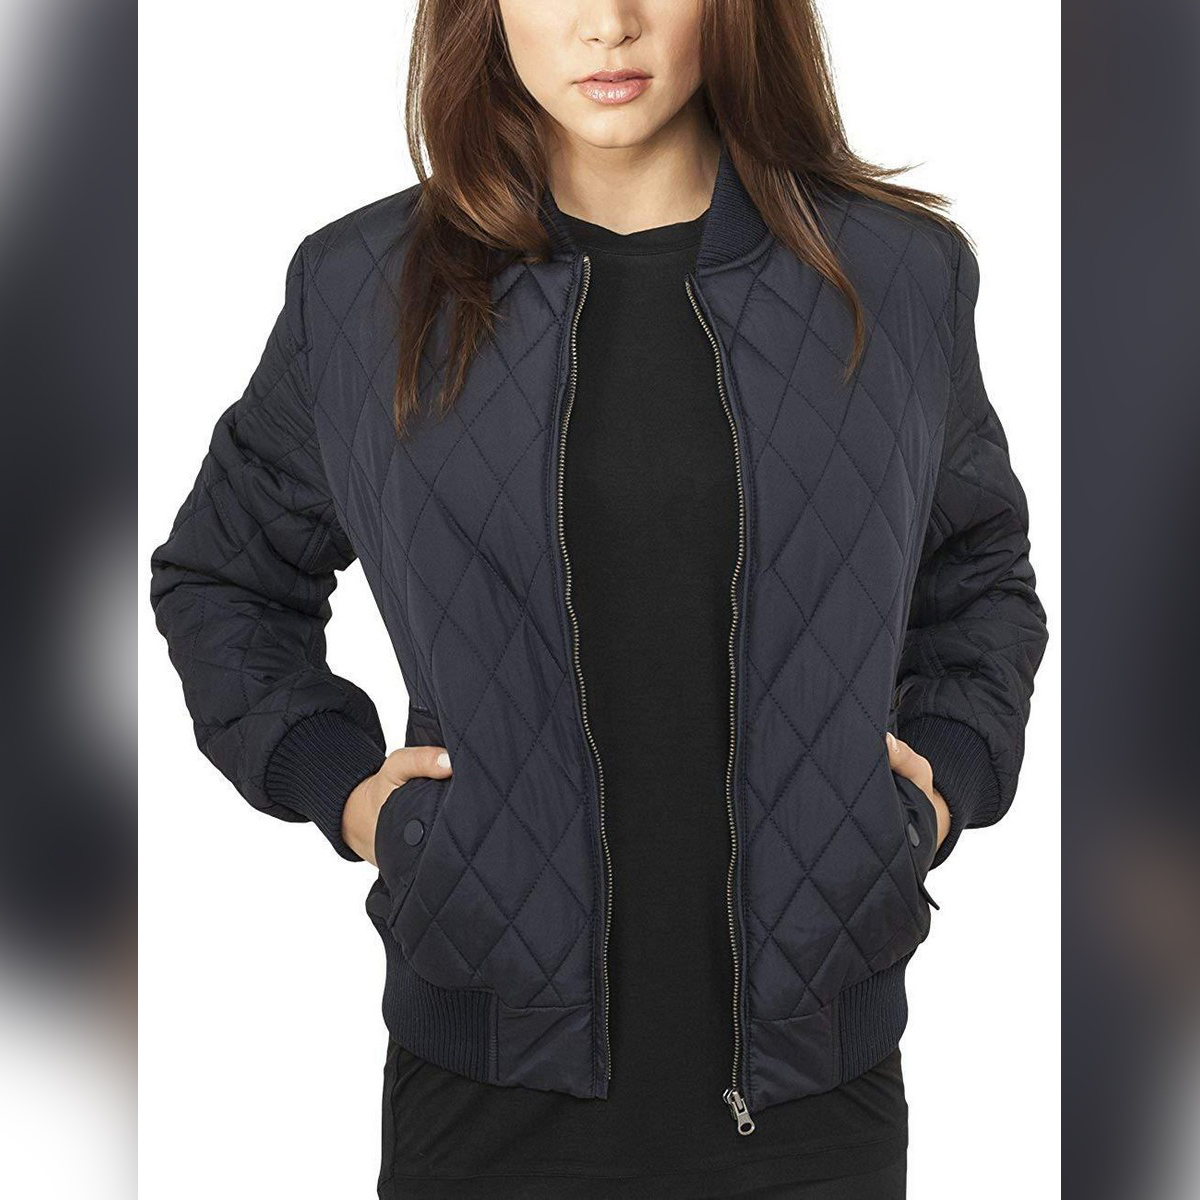 Ladies Blue Puffer Parachute Jacket For Women Price in Pakistan - View ...